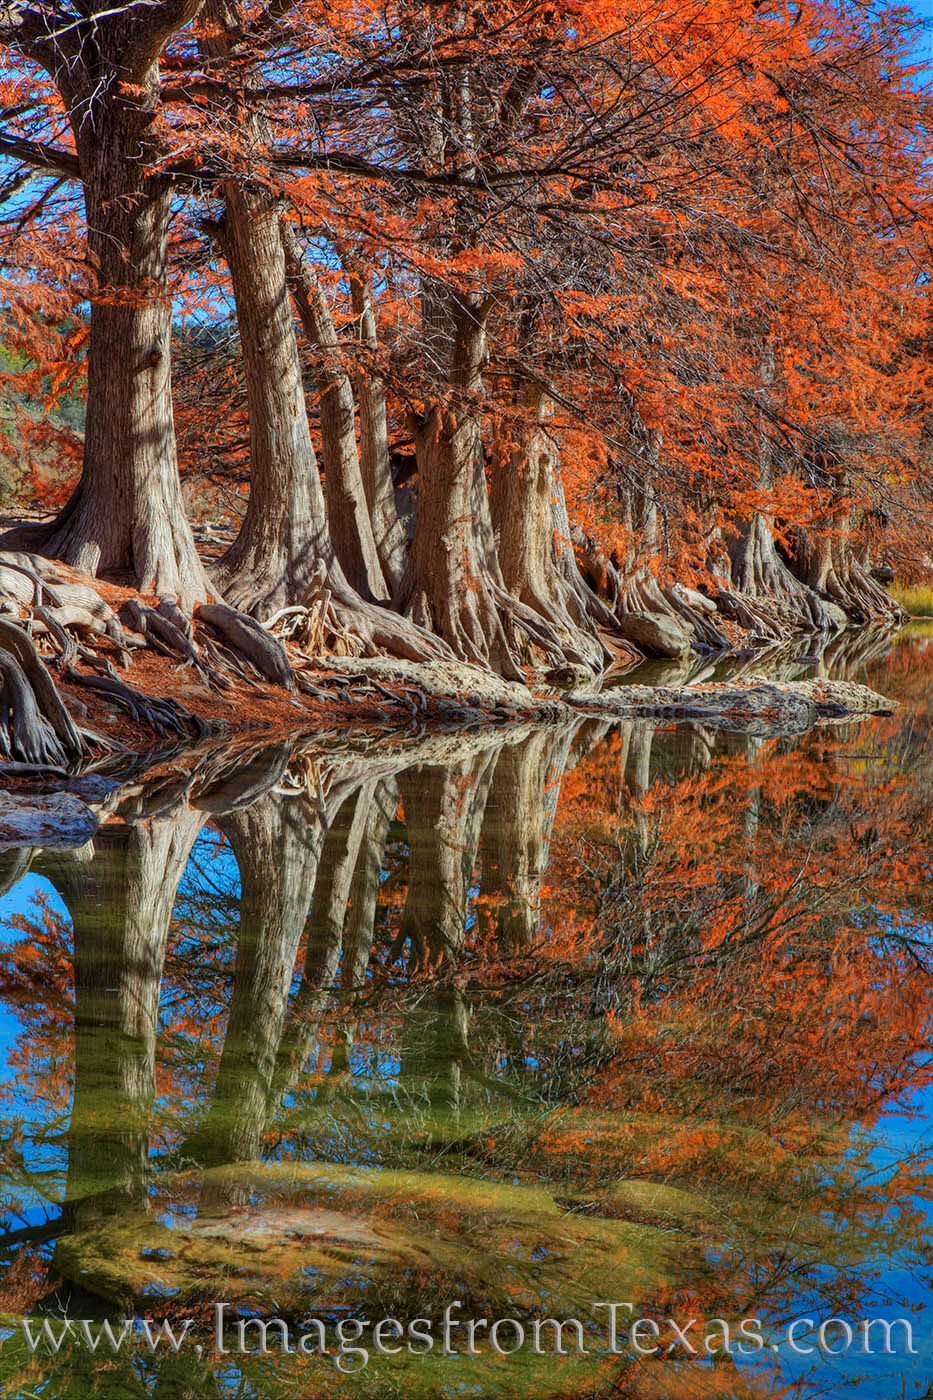 Craggy roots of cypress trees twist their way down the bank and into the clear water of the Pedernales River. Seen here on a...